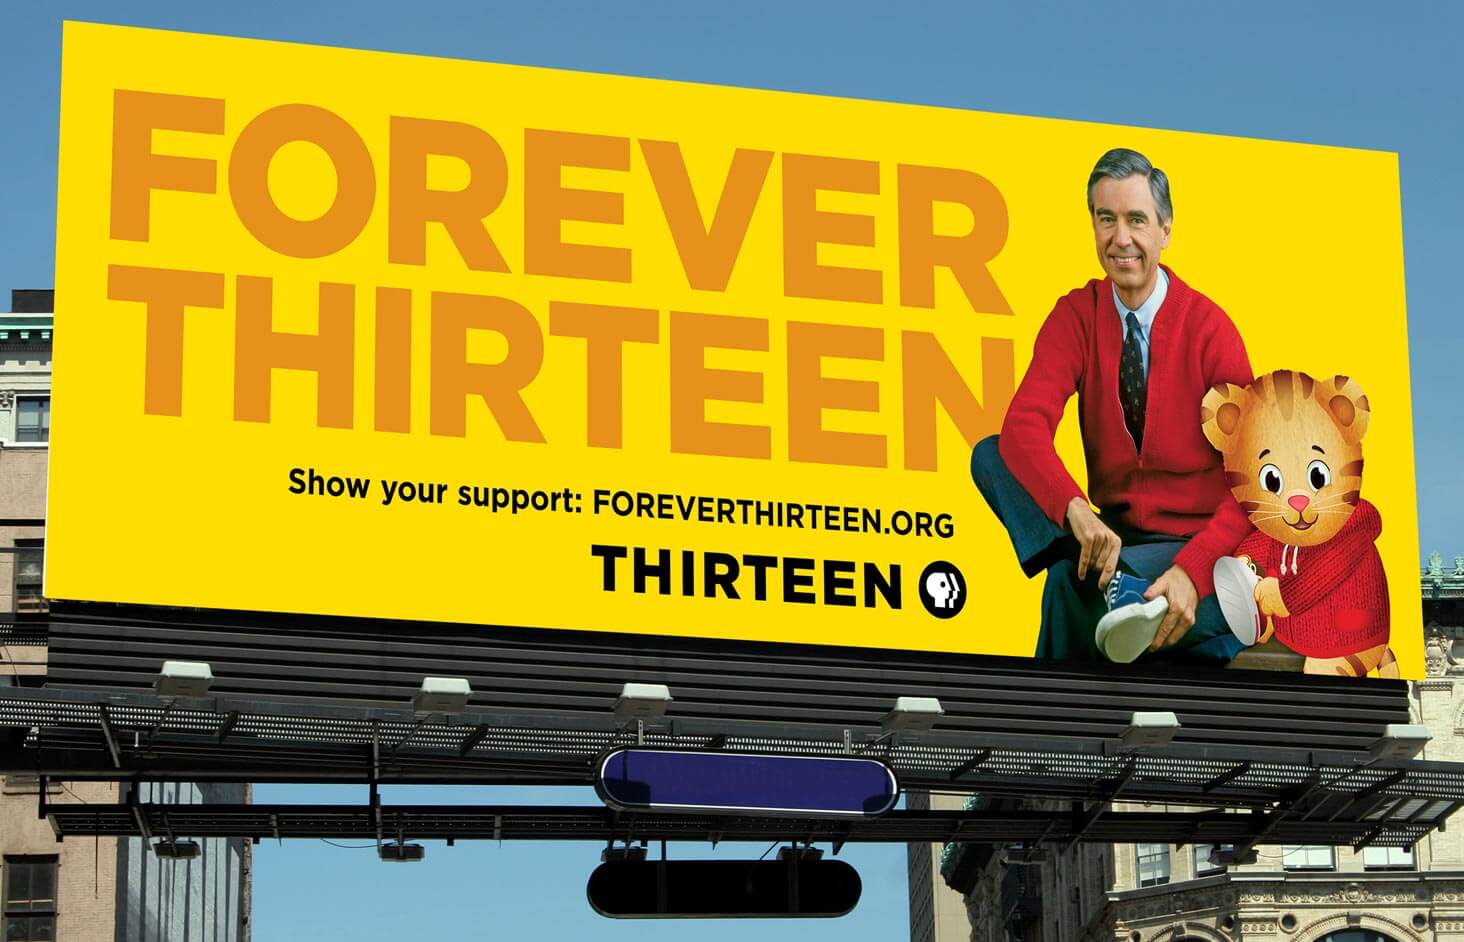 WNET Thirteen. Some people stay Thirteen forever